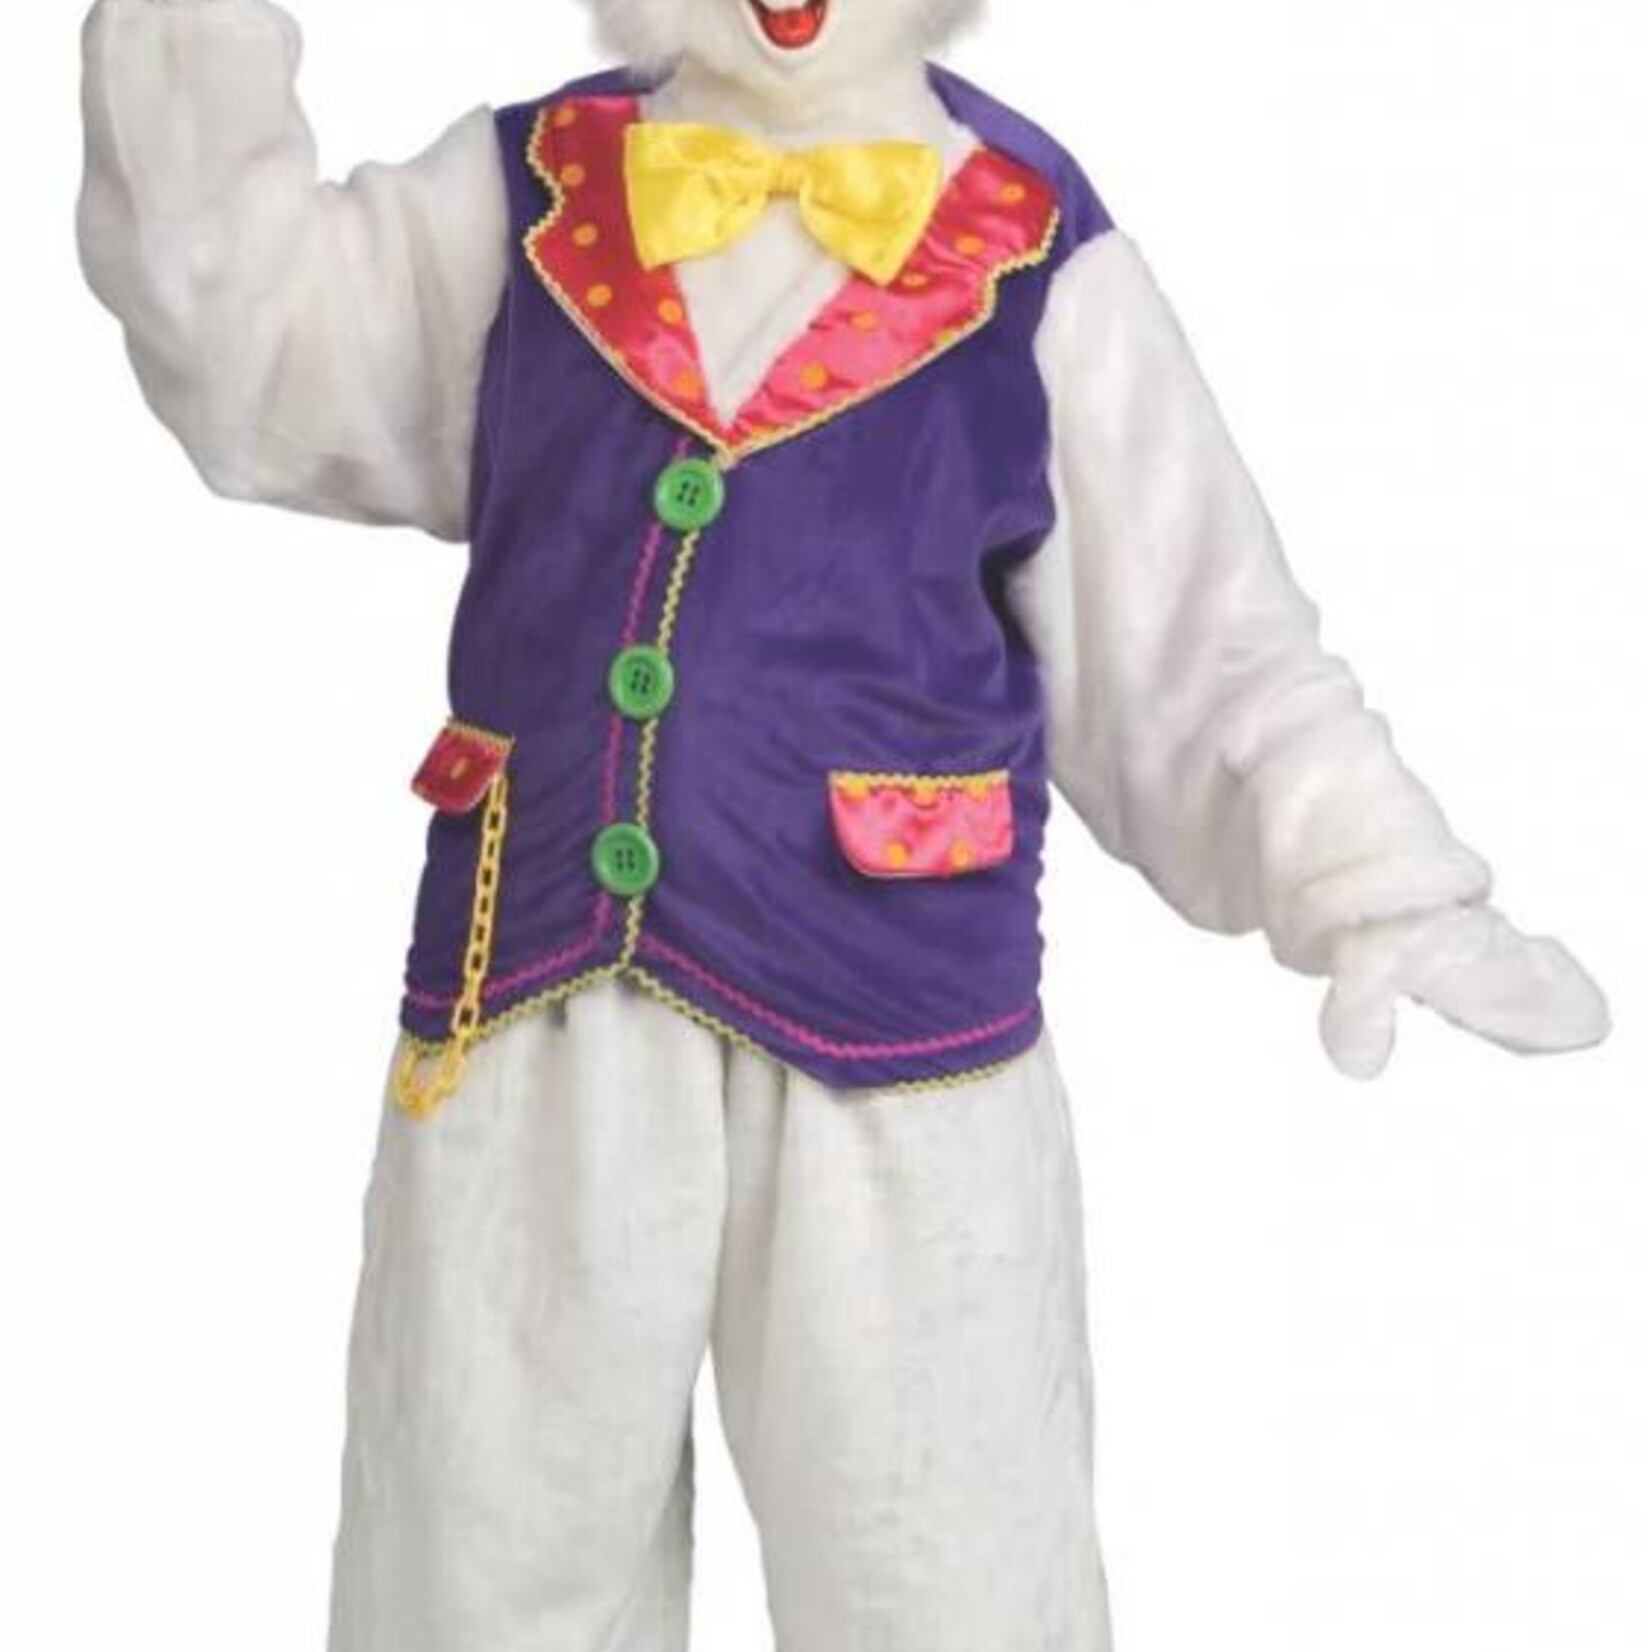 Bunny Costume White & Blue One Size